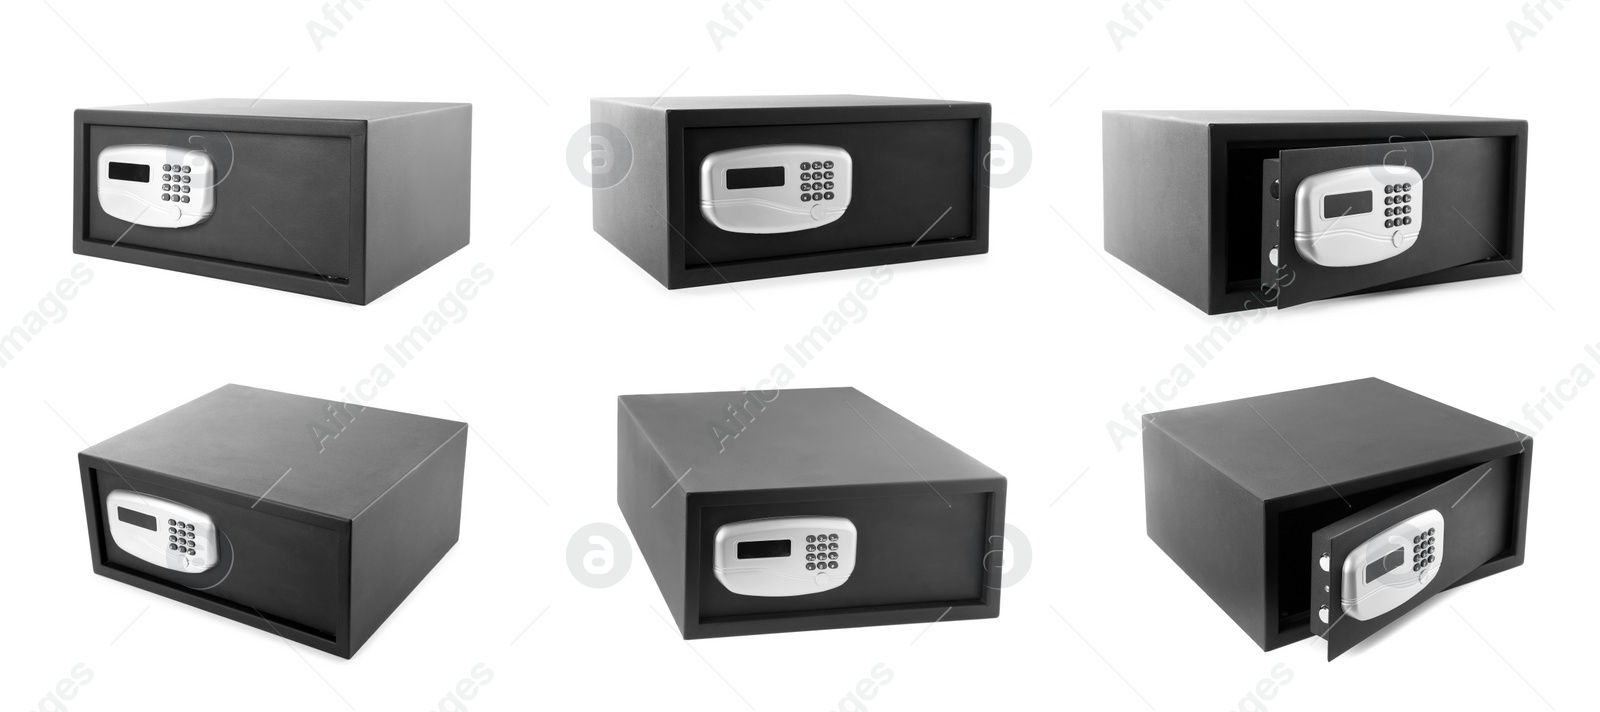 Image of Black steel safe on white background, view from different sides